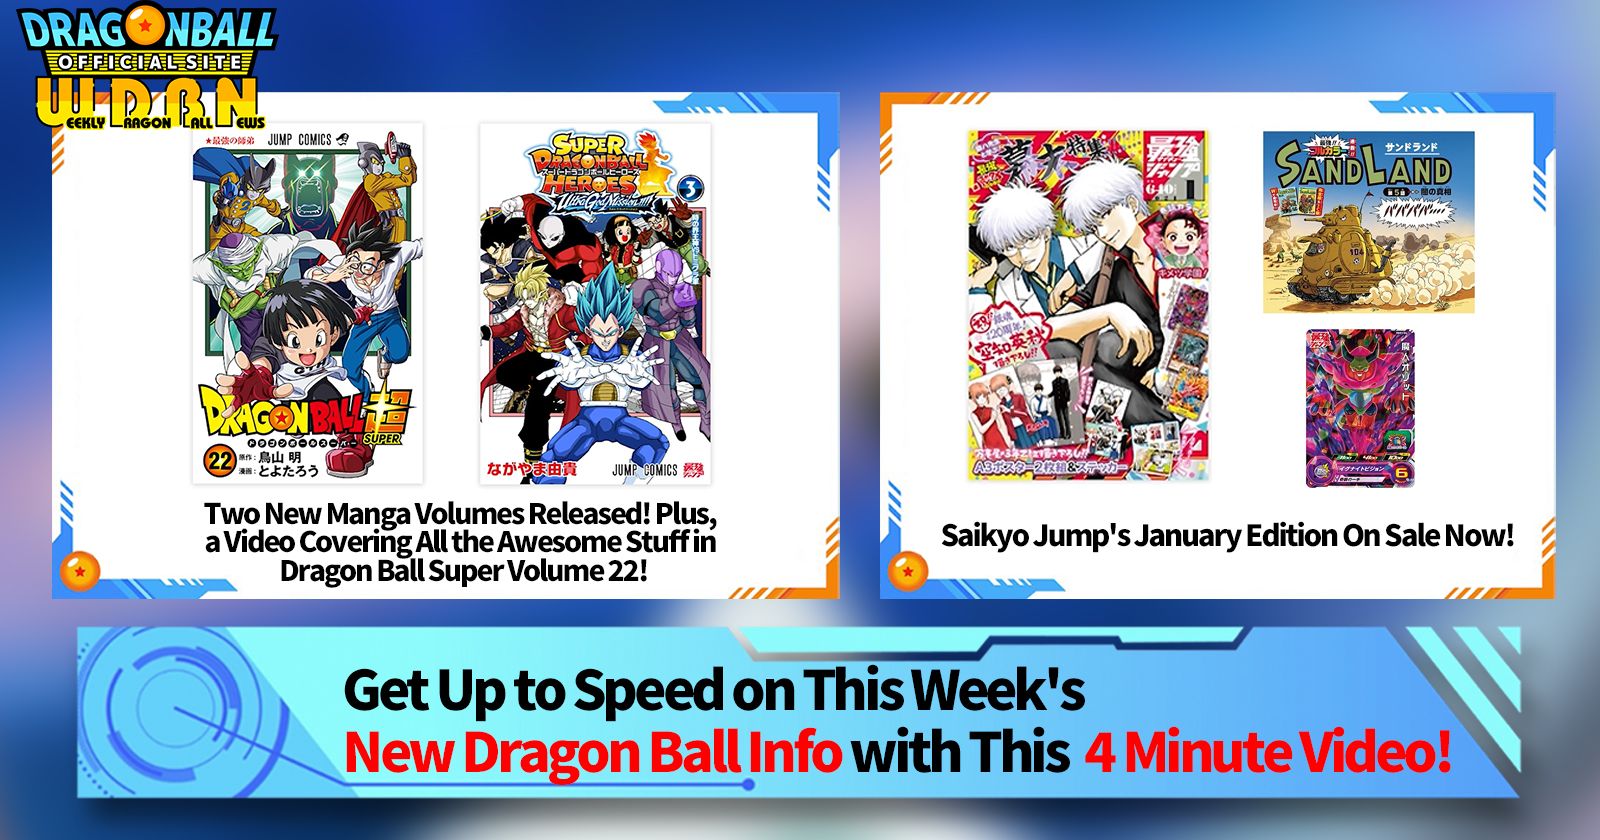 [December 4th] Weekly Dragon Ball News Broadcast!